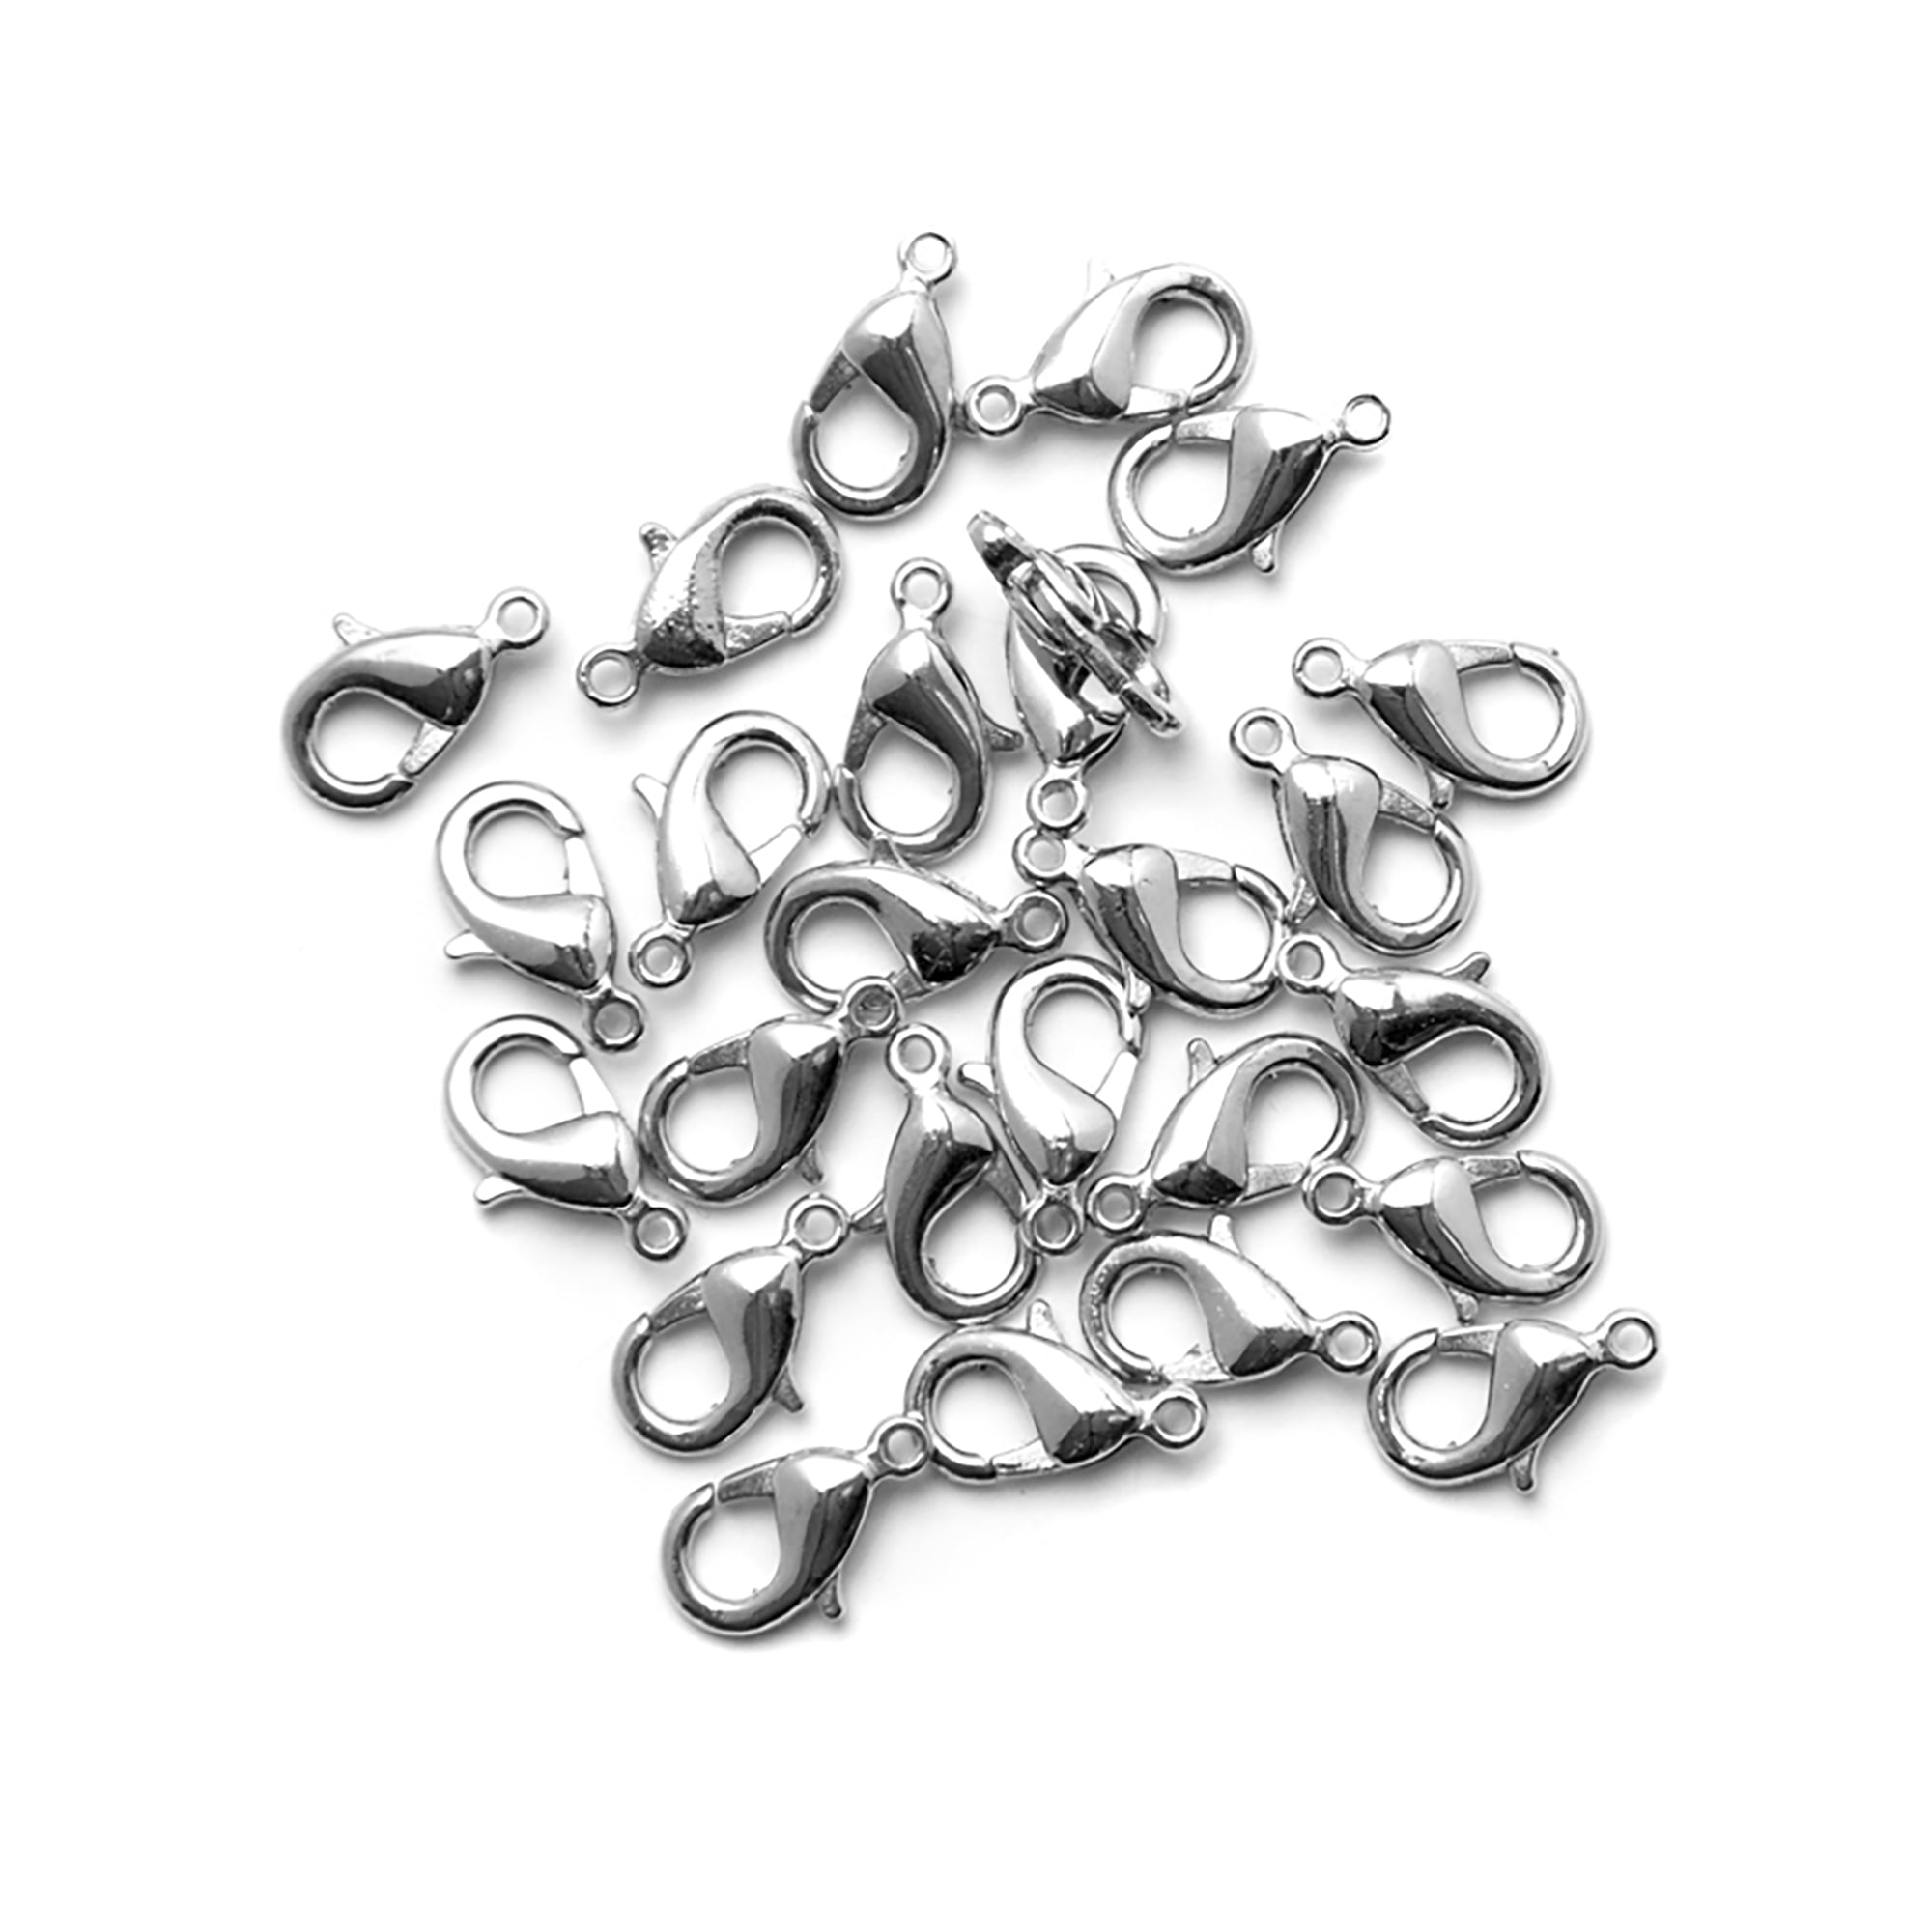 35 X SILVER PLATED LOBSTER CLAW CLASP 12MM X 6MM Jewellery Findings 